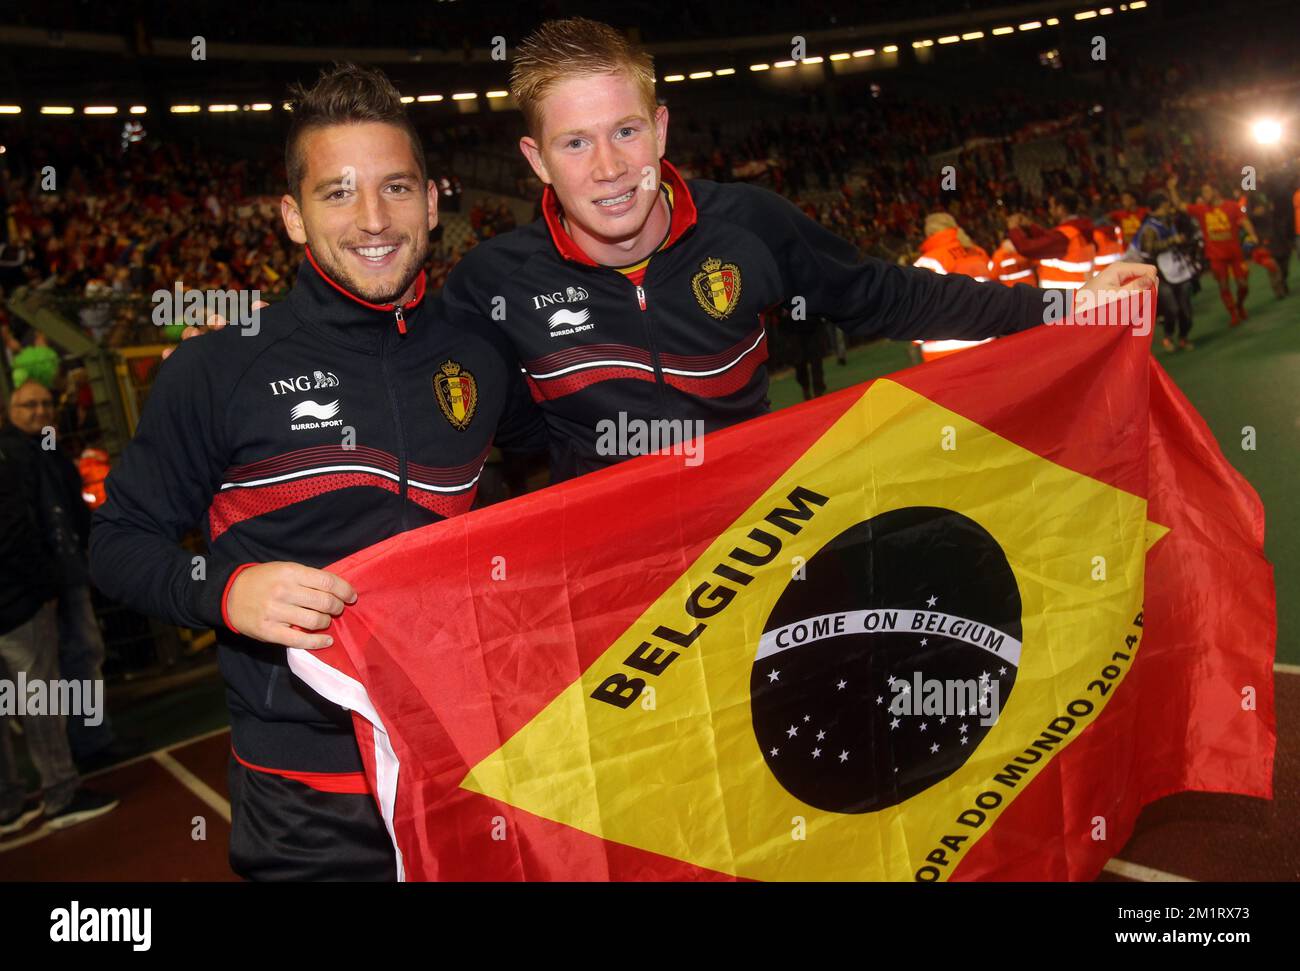 Belgium's Dries Mertens and Belgium's Kevin De Bruyne celebrate after a soccer game between Belgian national team The Red Devils and the Wales national team at the Koning Boudewijn Stadion - Stade Roi Baudouin in Brussels, Tuesday 15 October 2013, the last qualification game for the 2014 FIFA World Cup. The Red Devils are qualified for the 2014 FIFA World Cup in Brazil as group leader.   Stock Photo